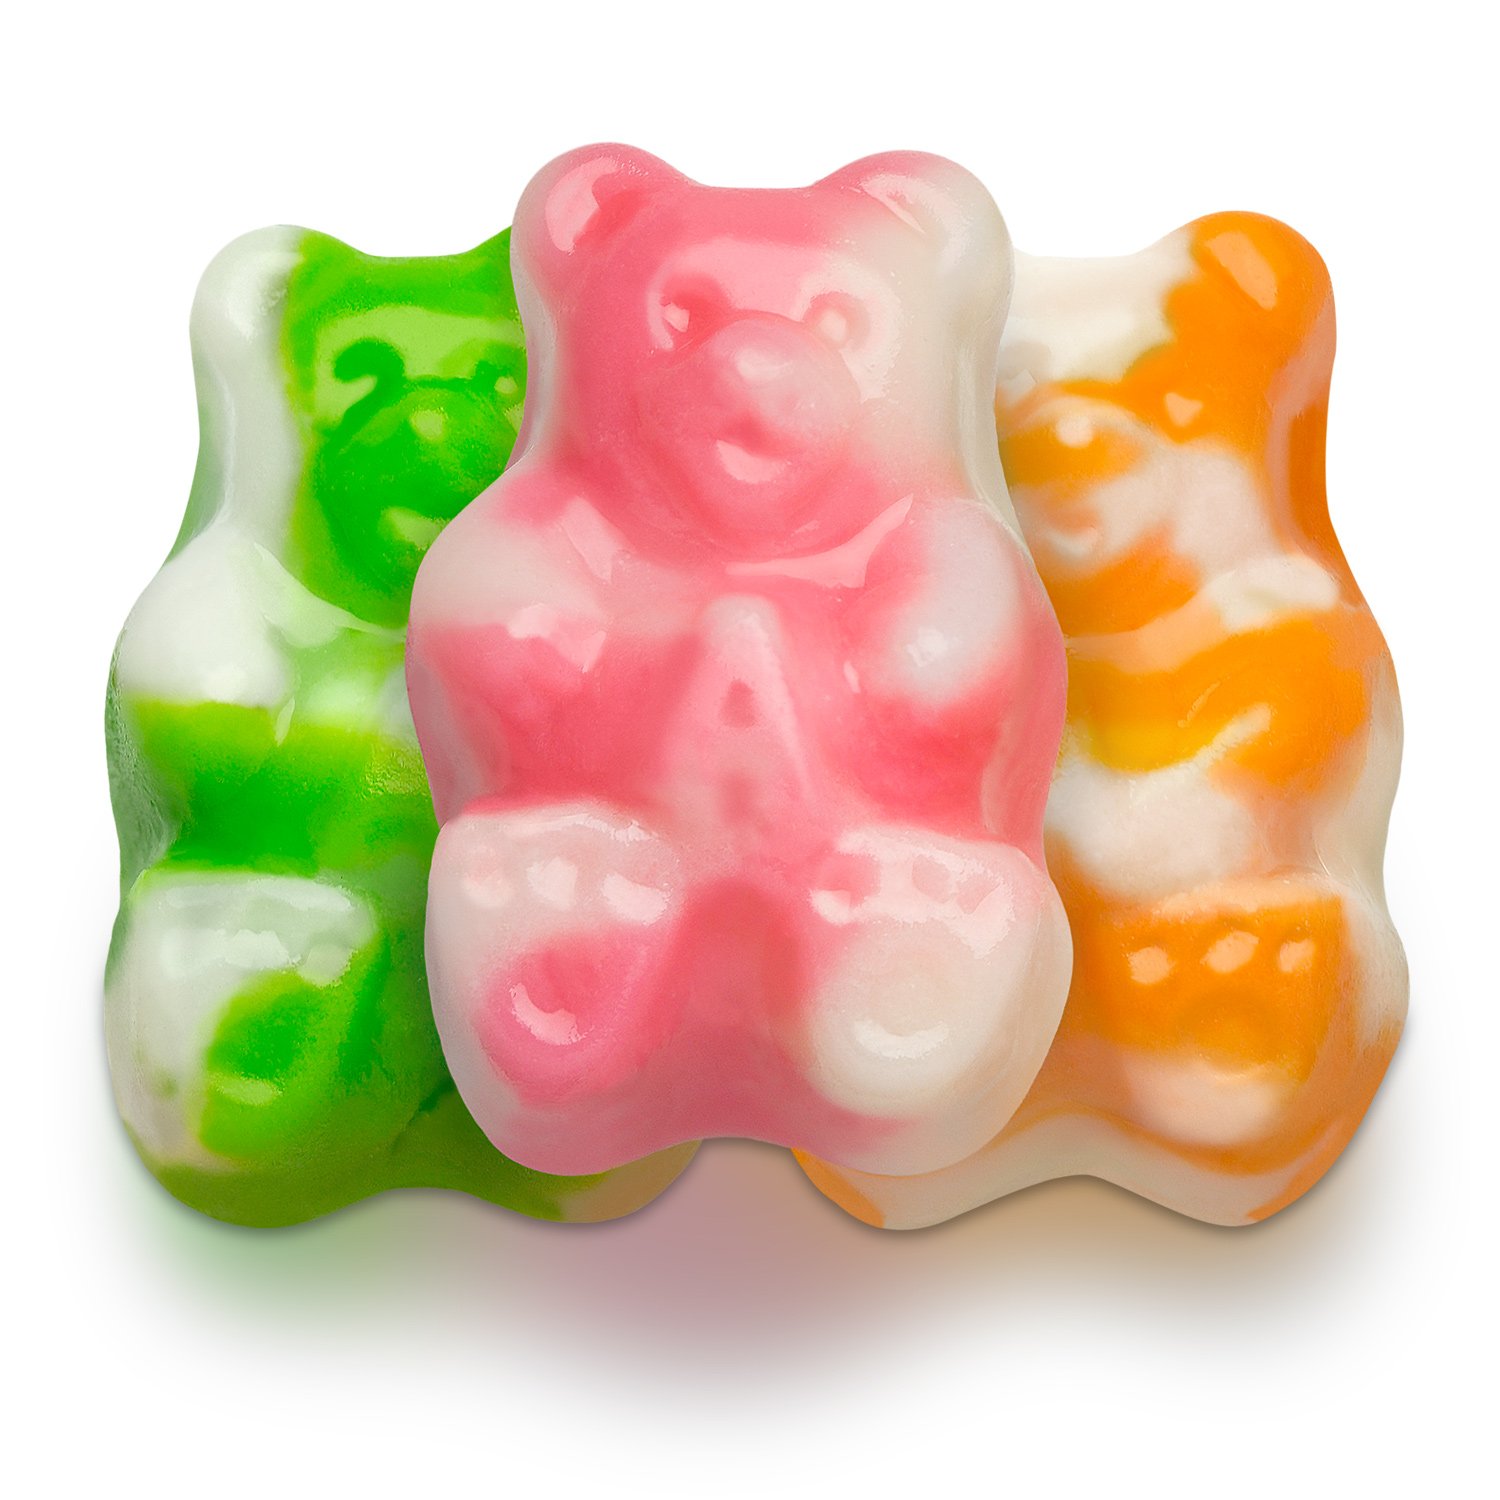 Sherbert Gummi Bears 212g Bag - You don't have to eat ice cream to get...